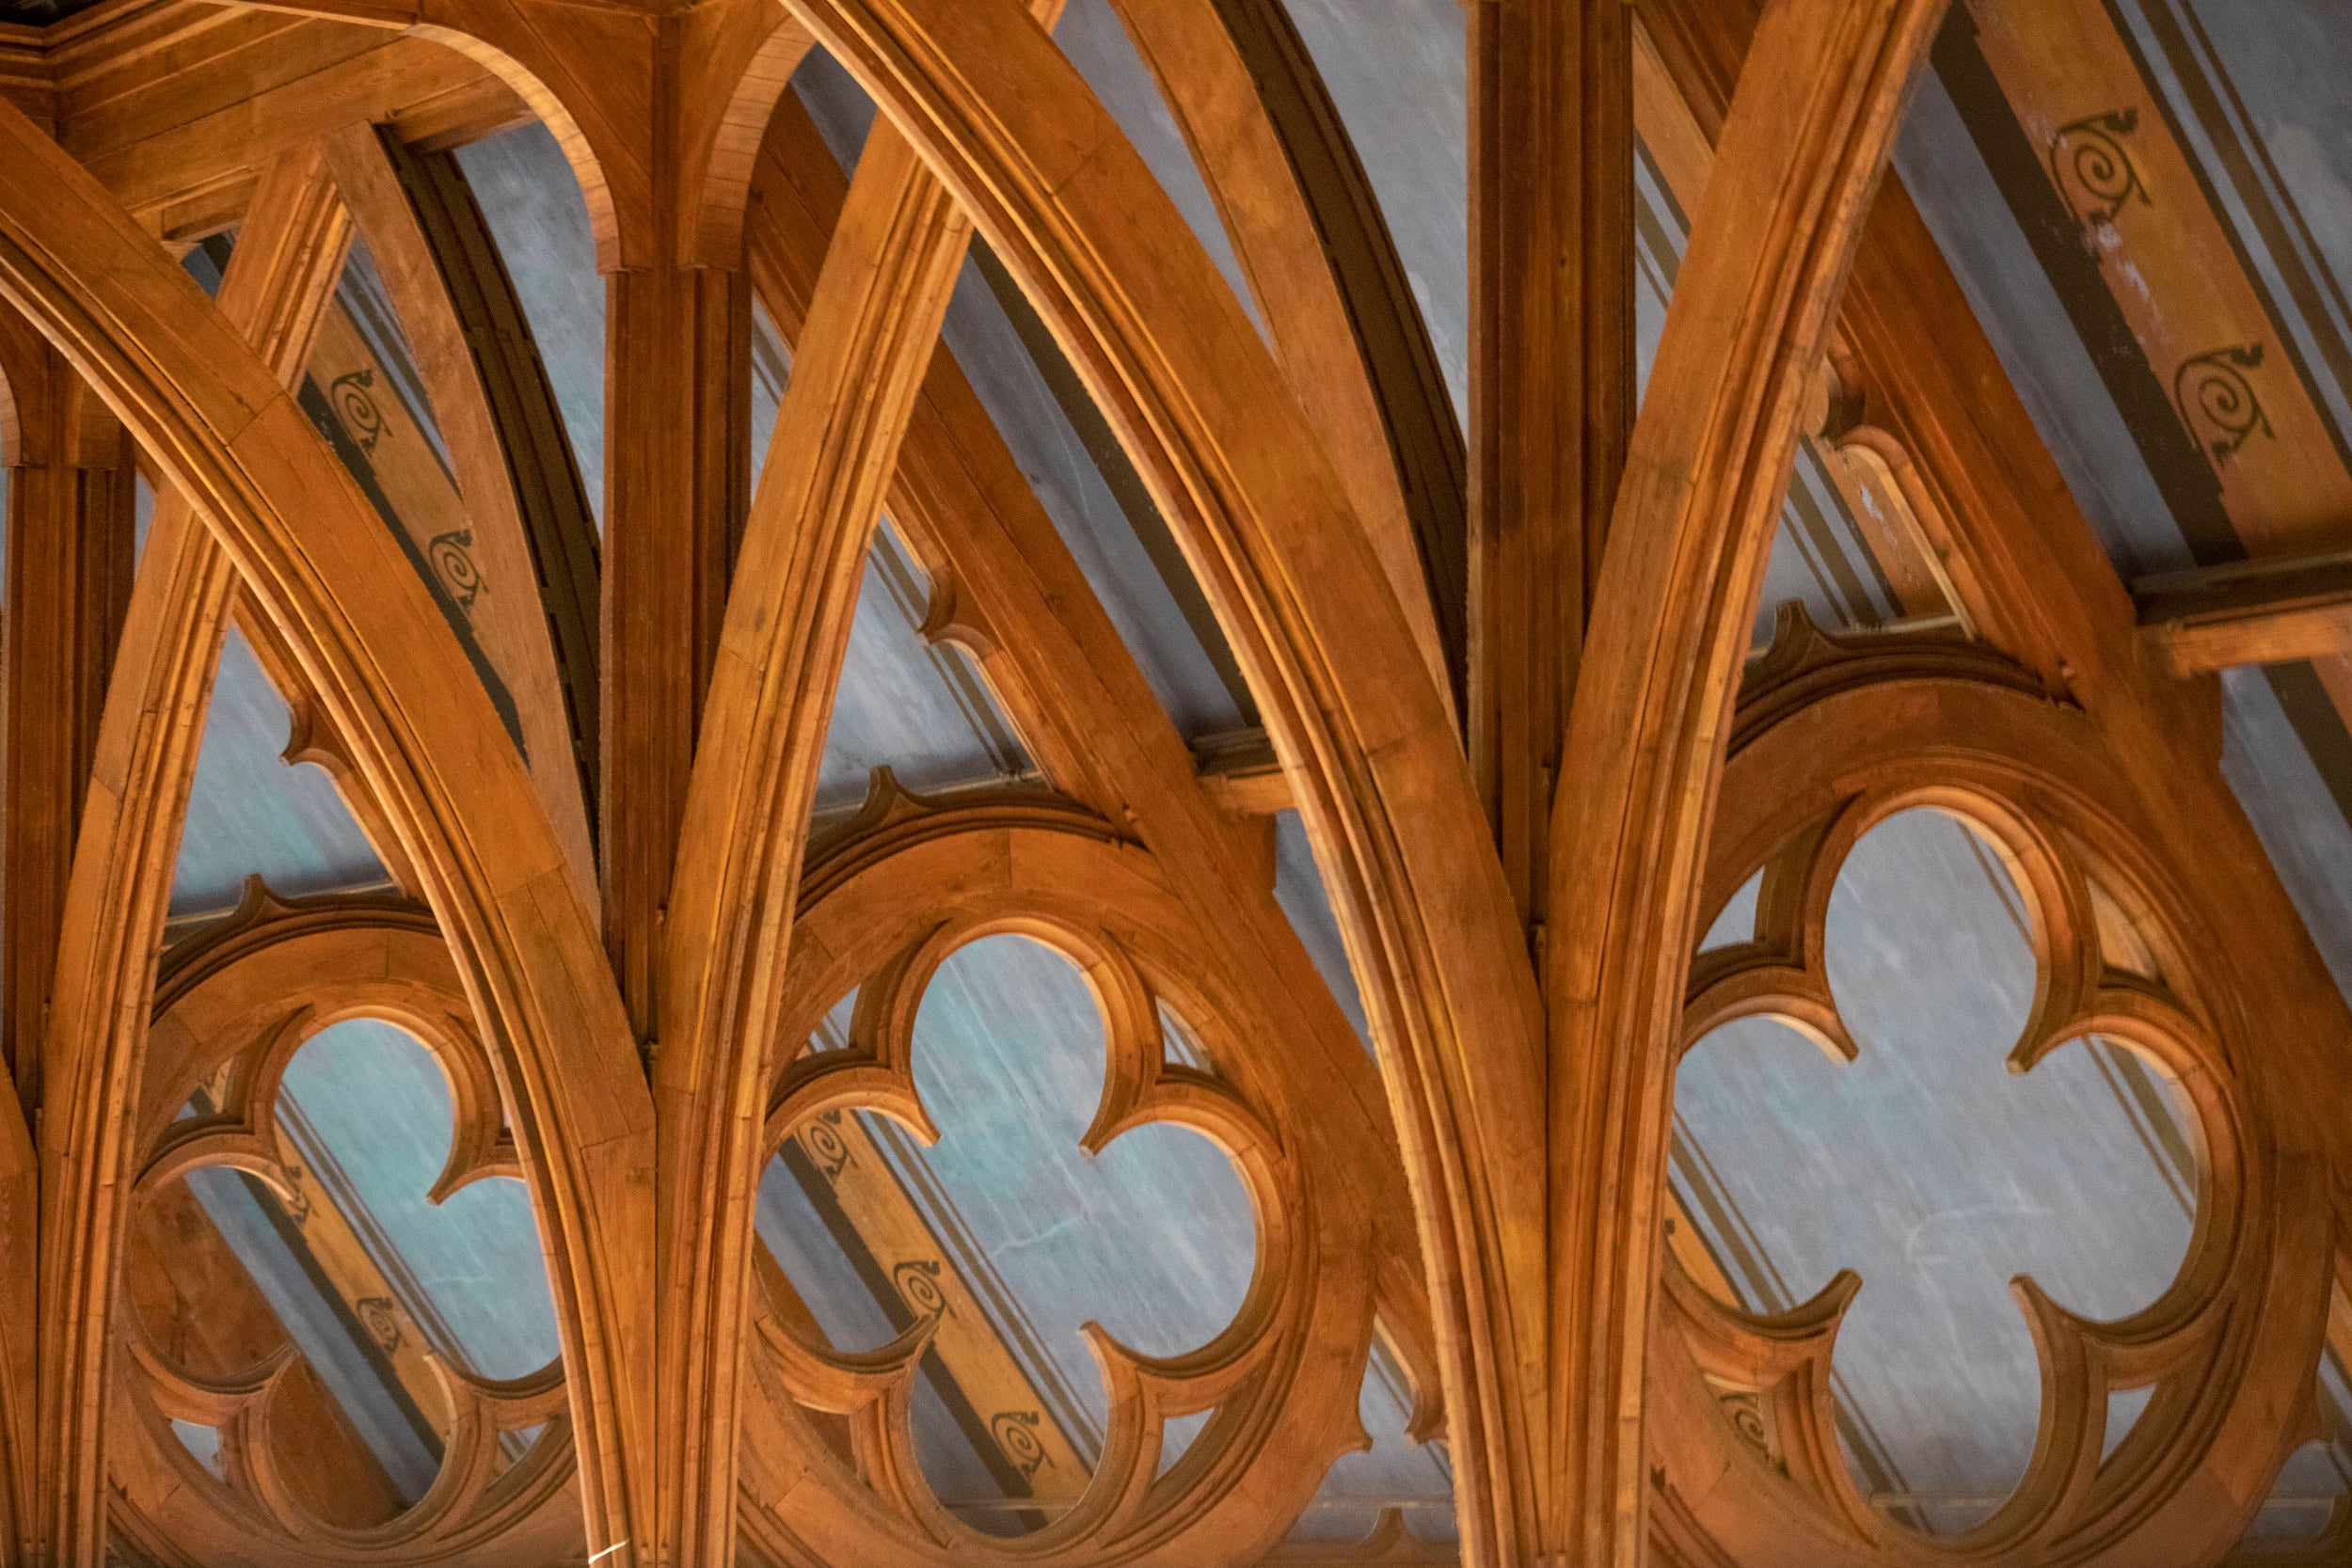 Arches and clover motifs are pictured in the ceiling above Annenberg Hall.